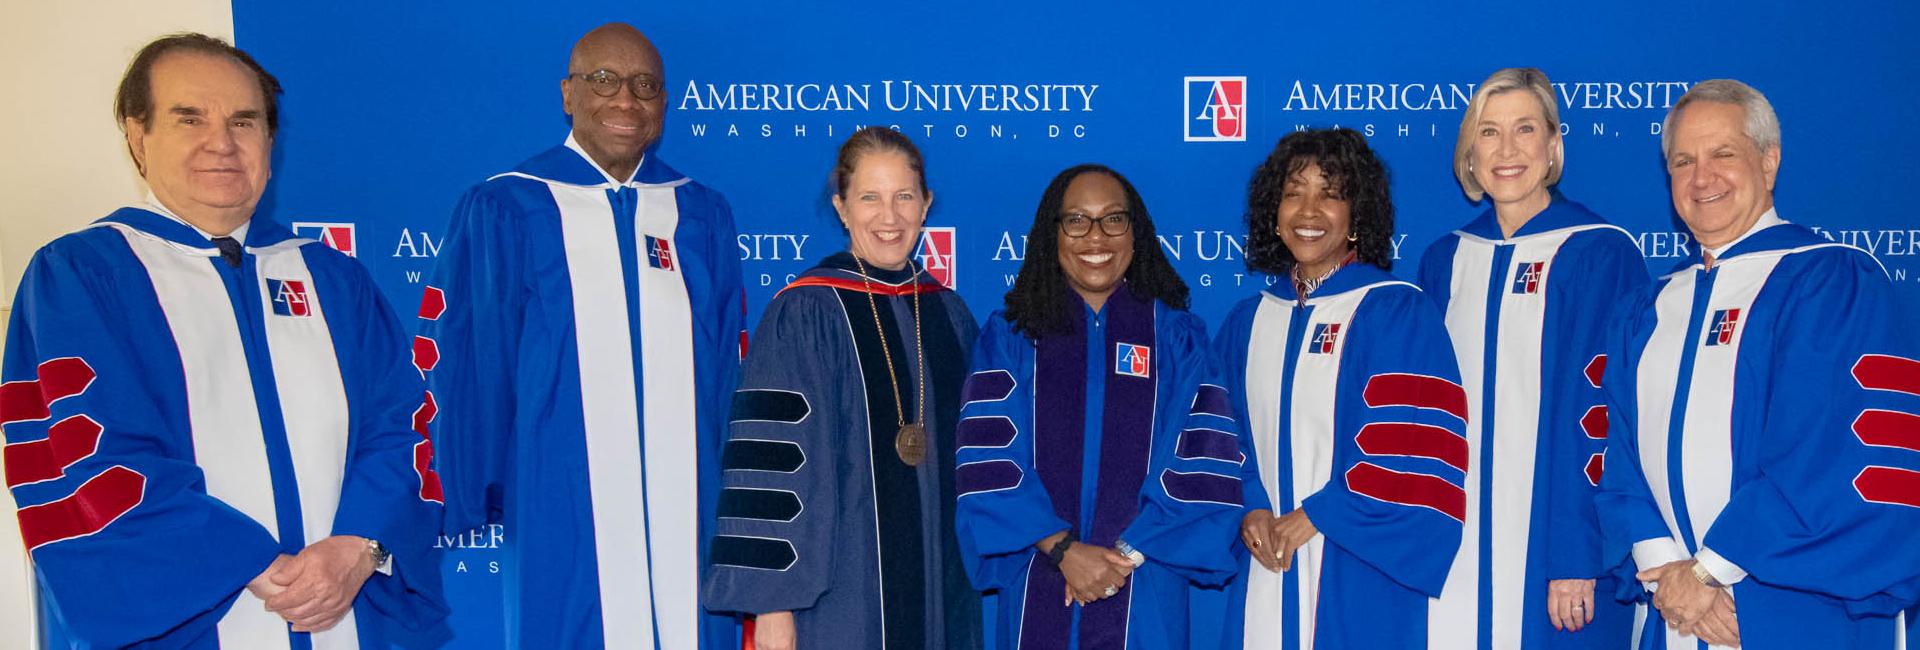 AU Trustees at Washington College of Law Commencement